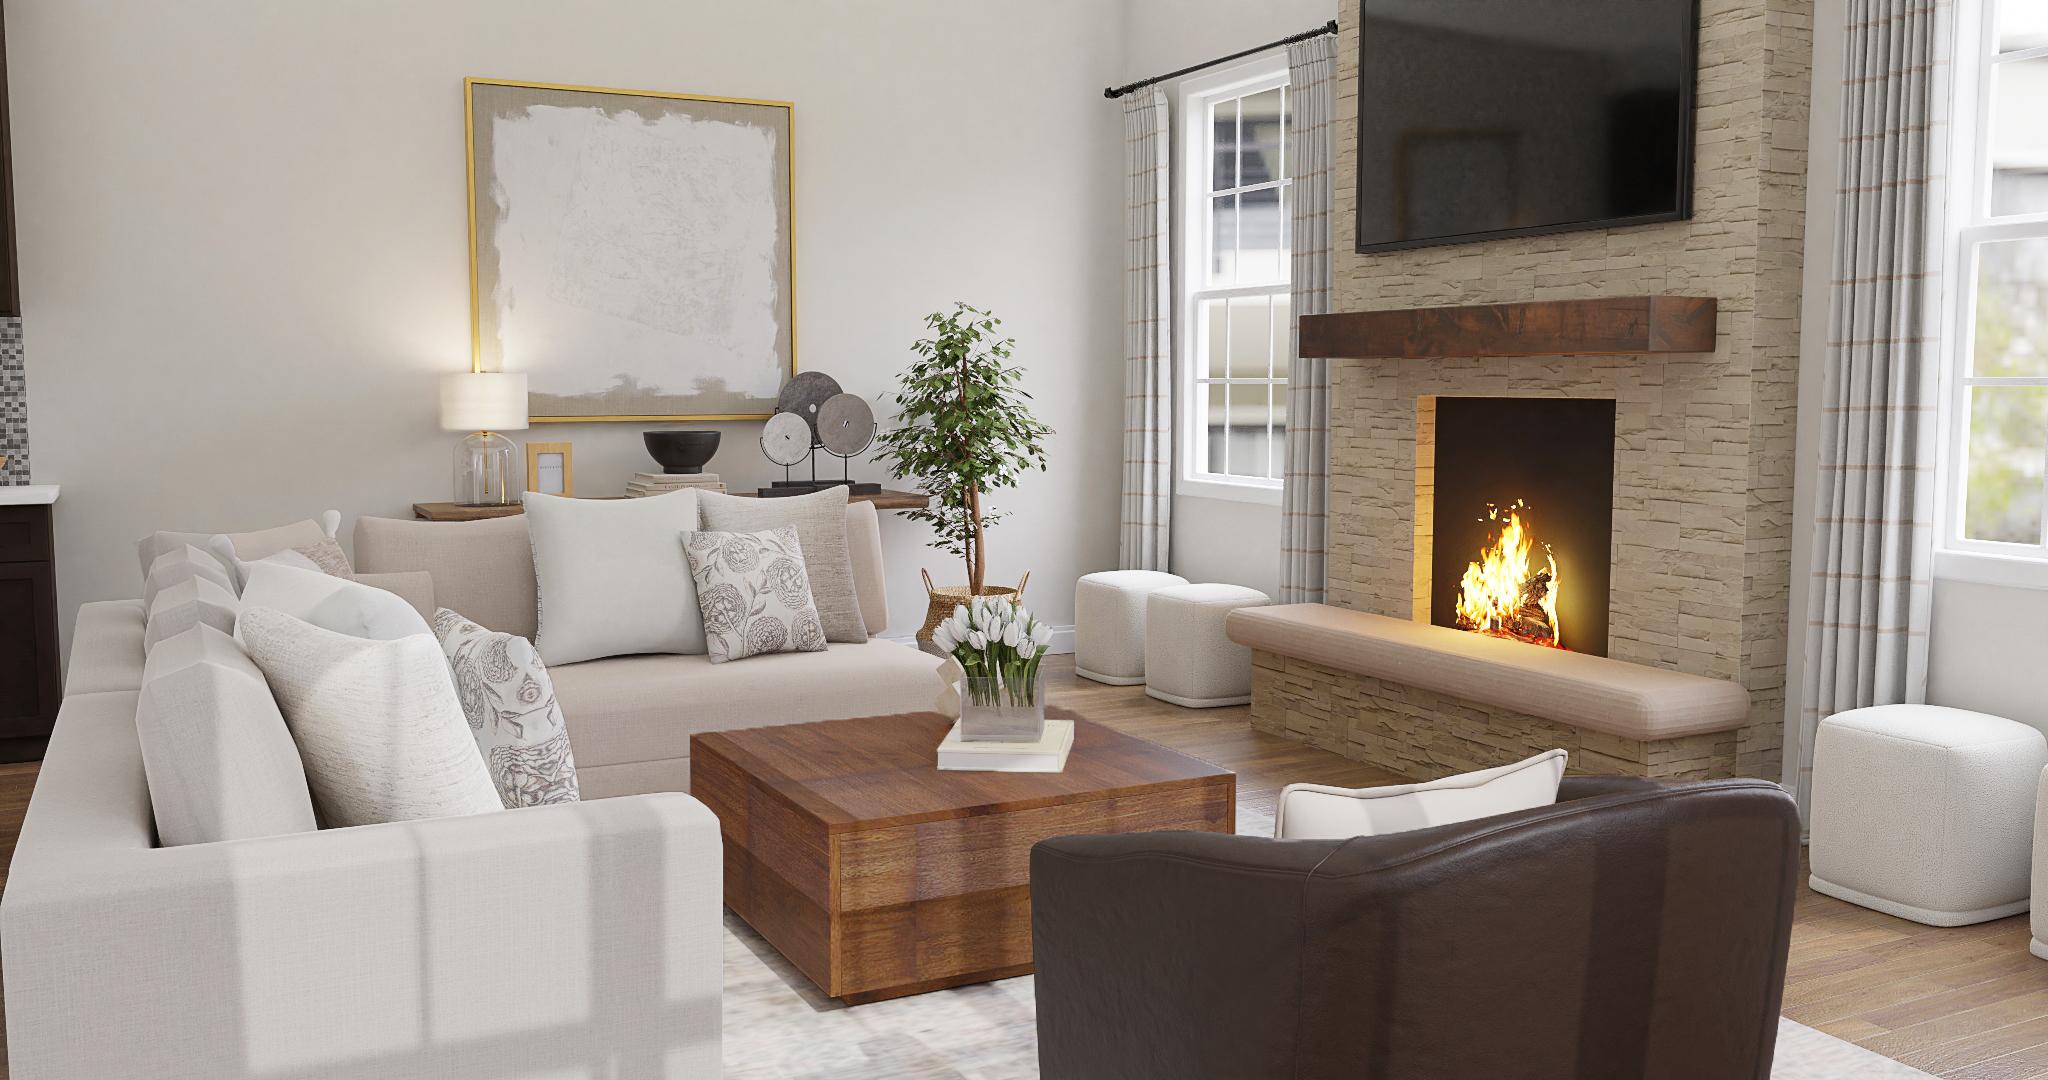 Transitional Living Room With A Brick Fireplace 